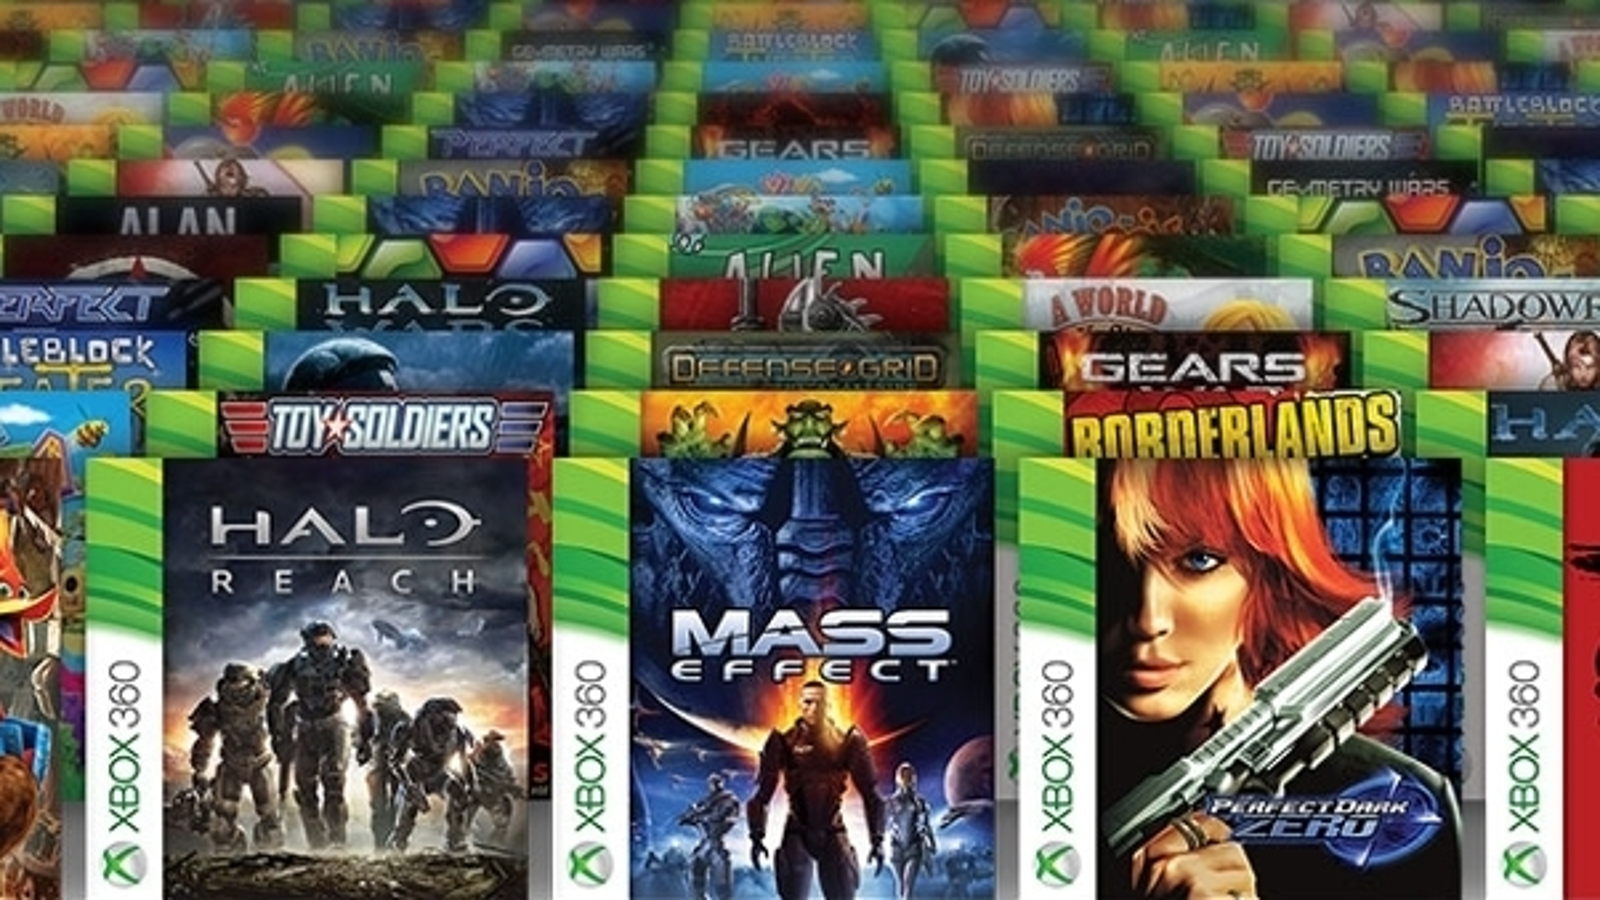 Xbox One games announced at E3 (pictures) - CNET